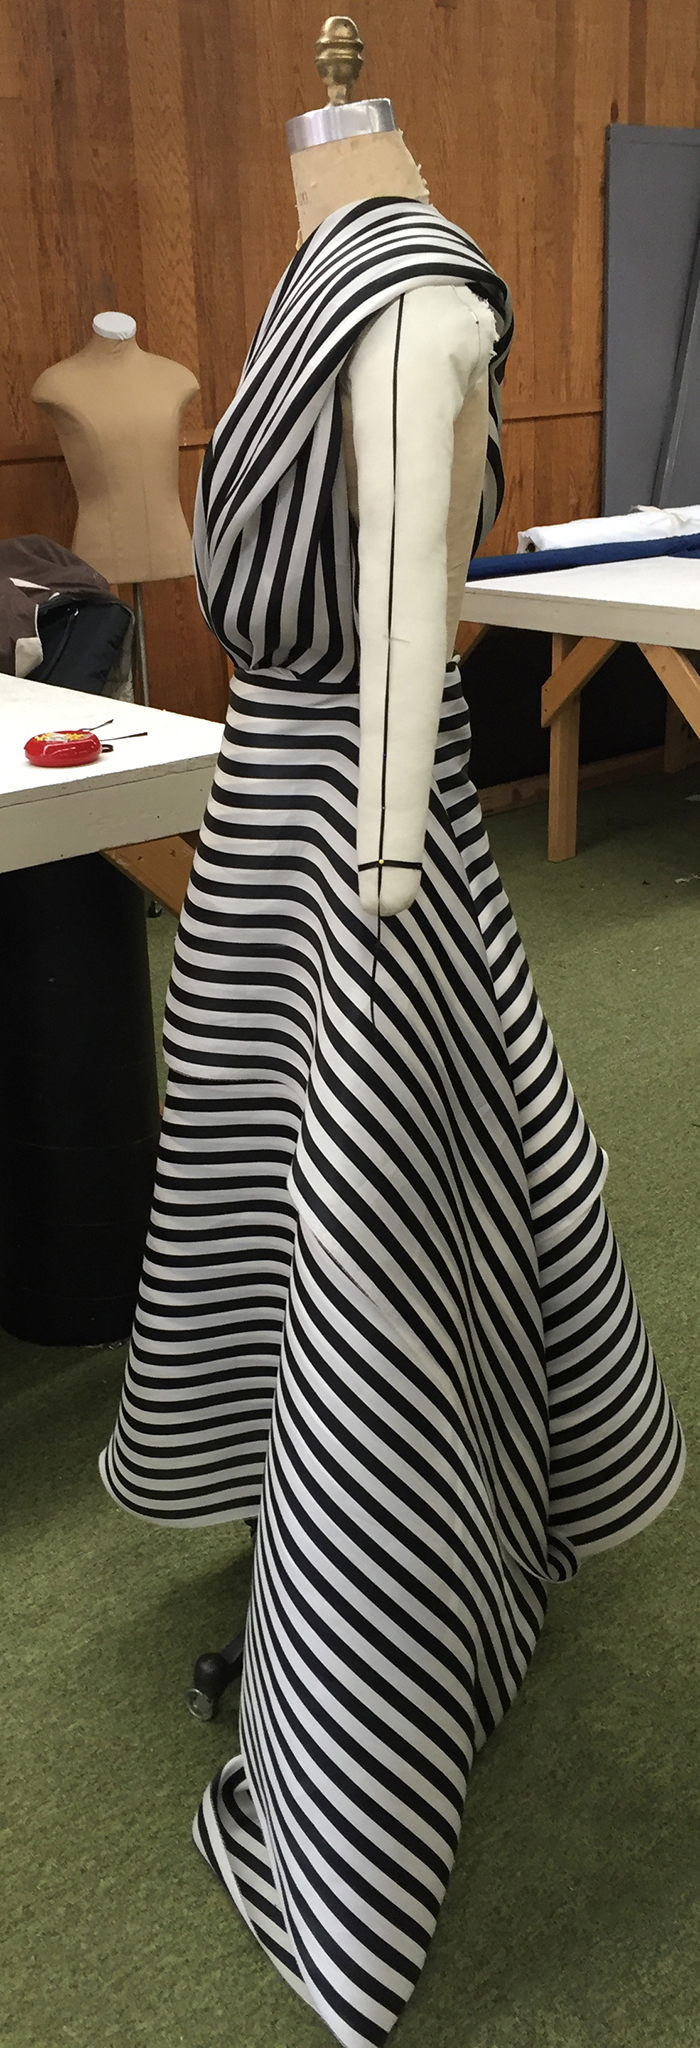 10 yards of continuous black and white silk organza fabric draped over a dress form.